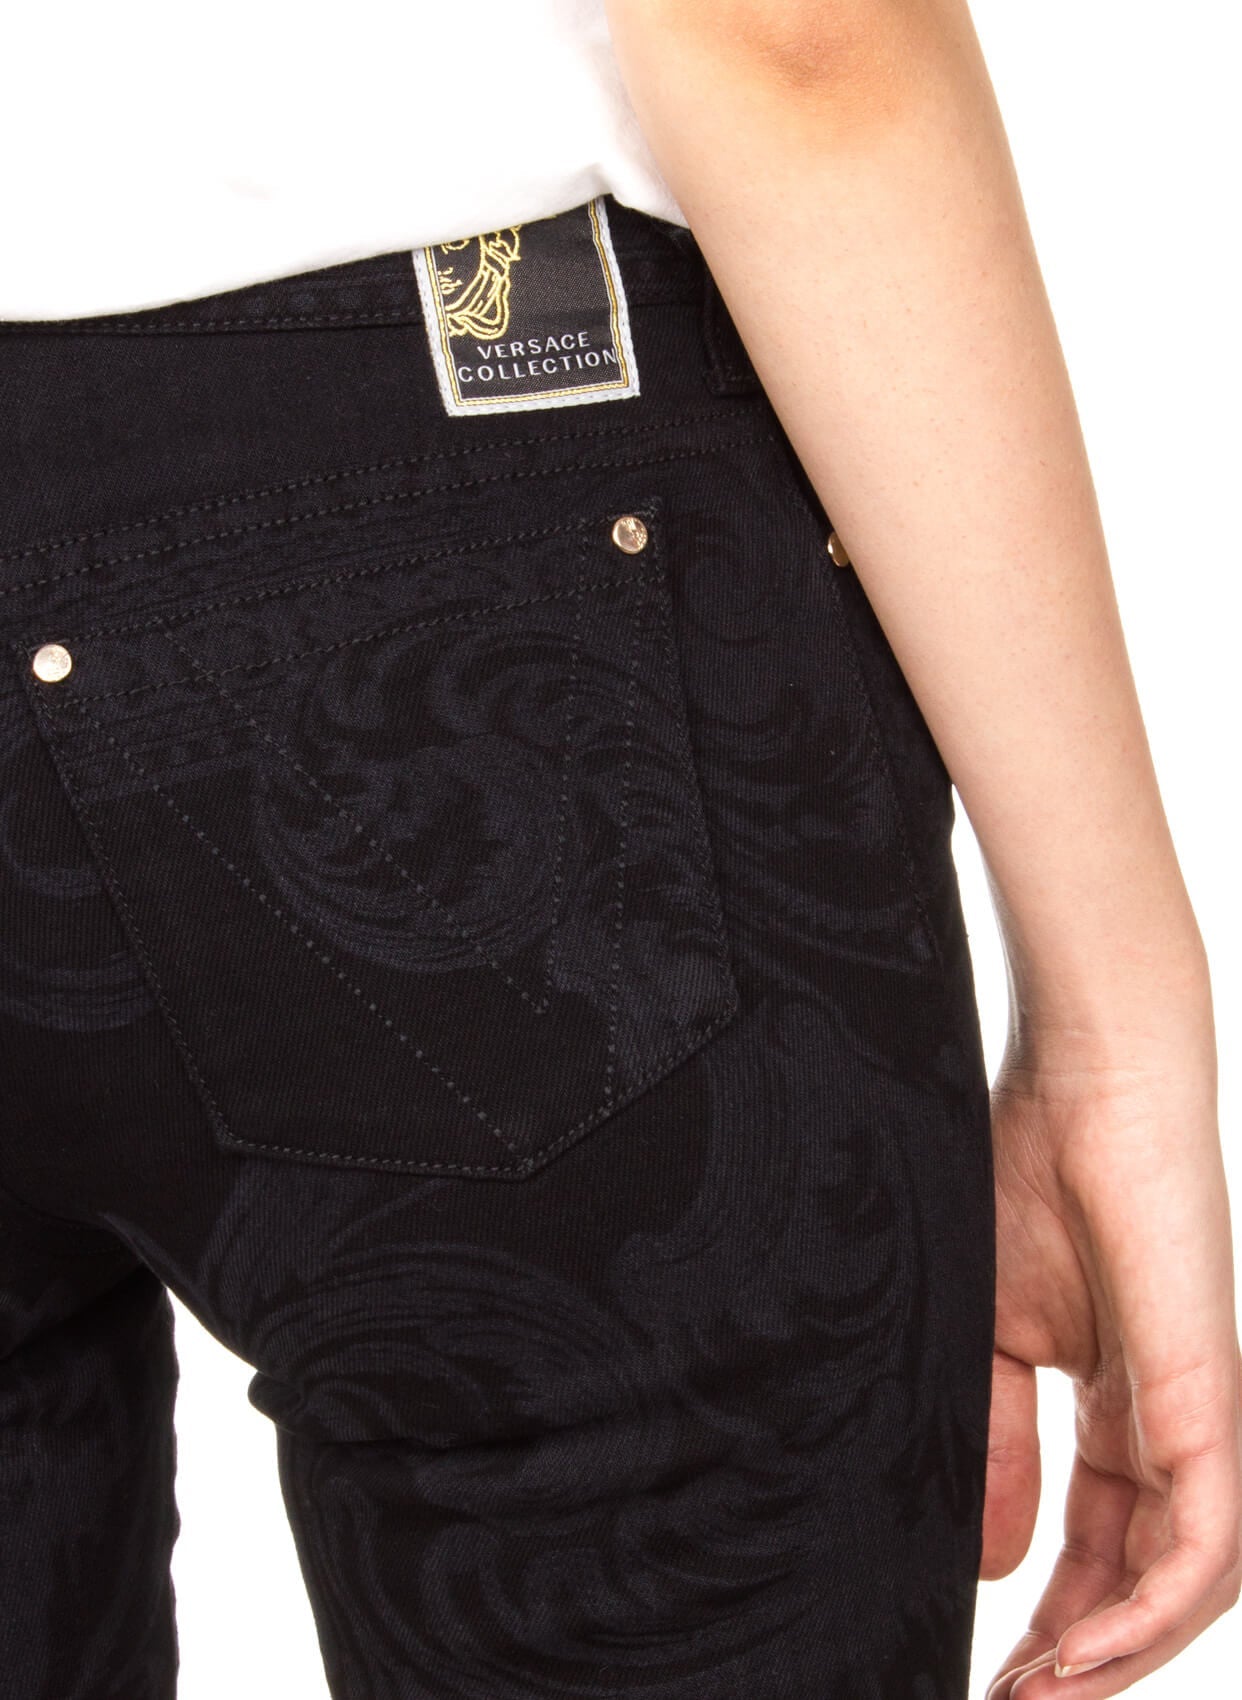 VERSACE COLLECTION JEANS